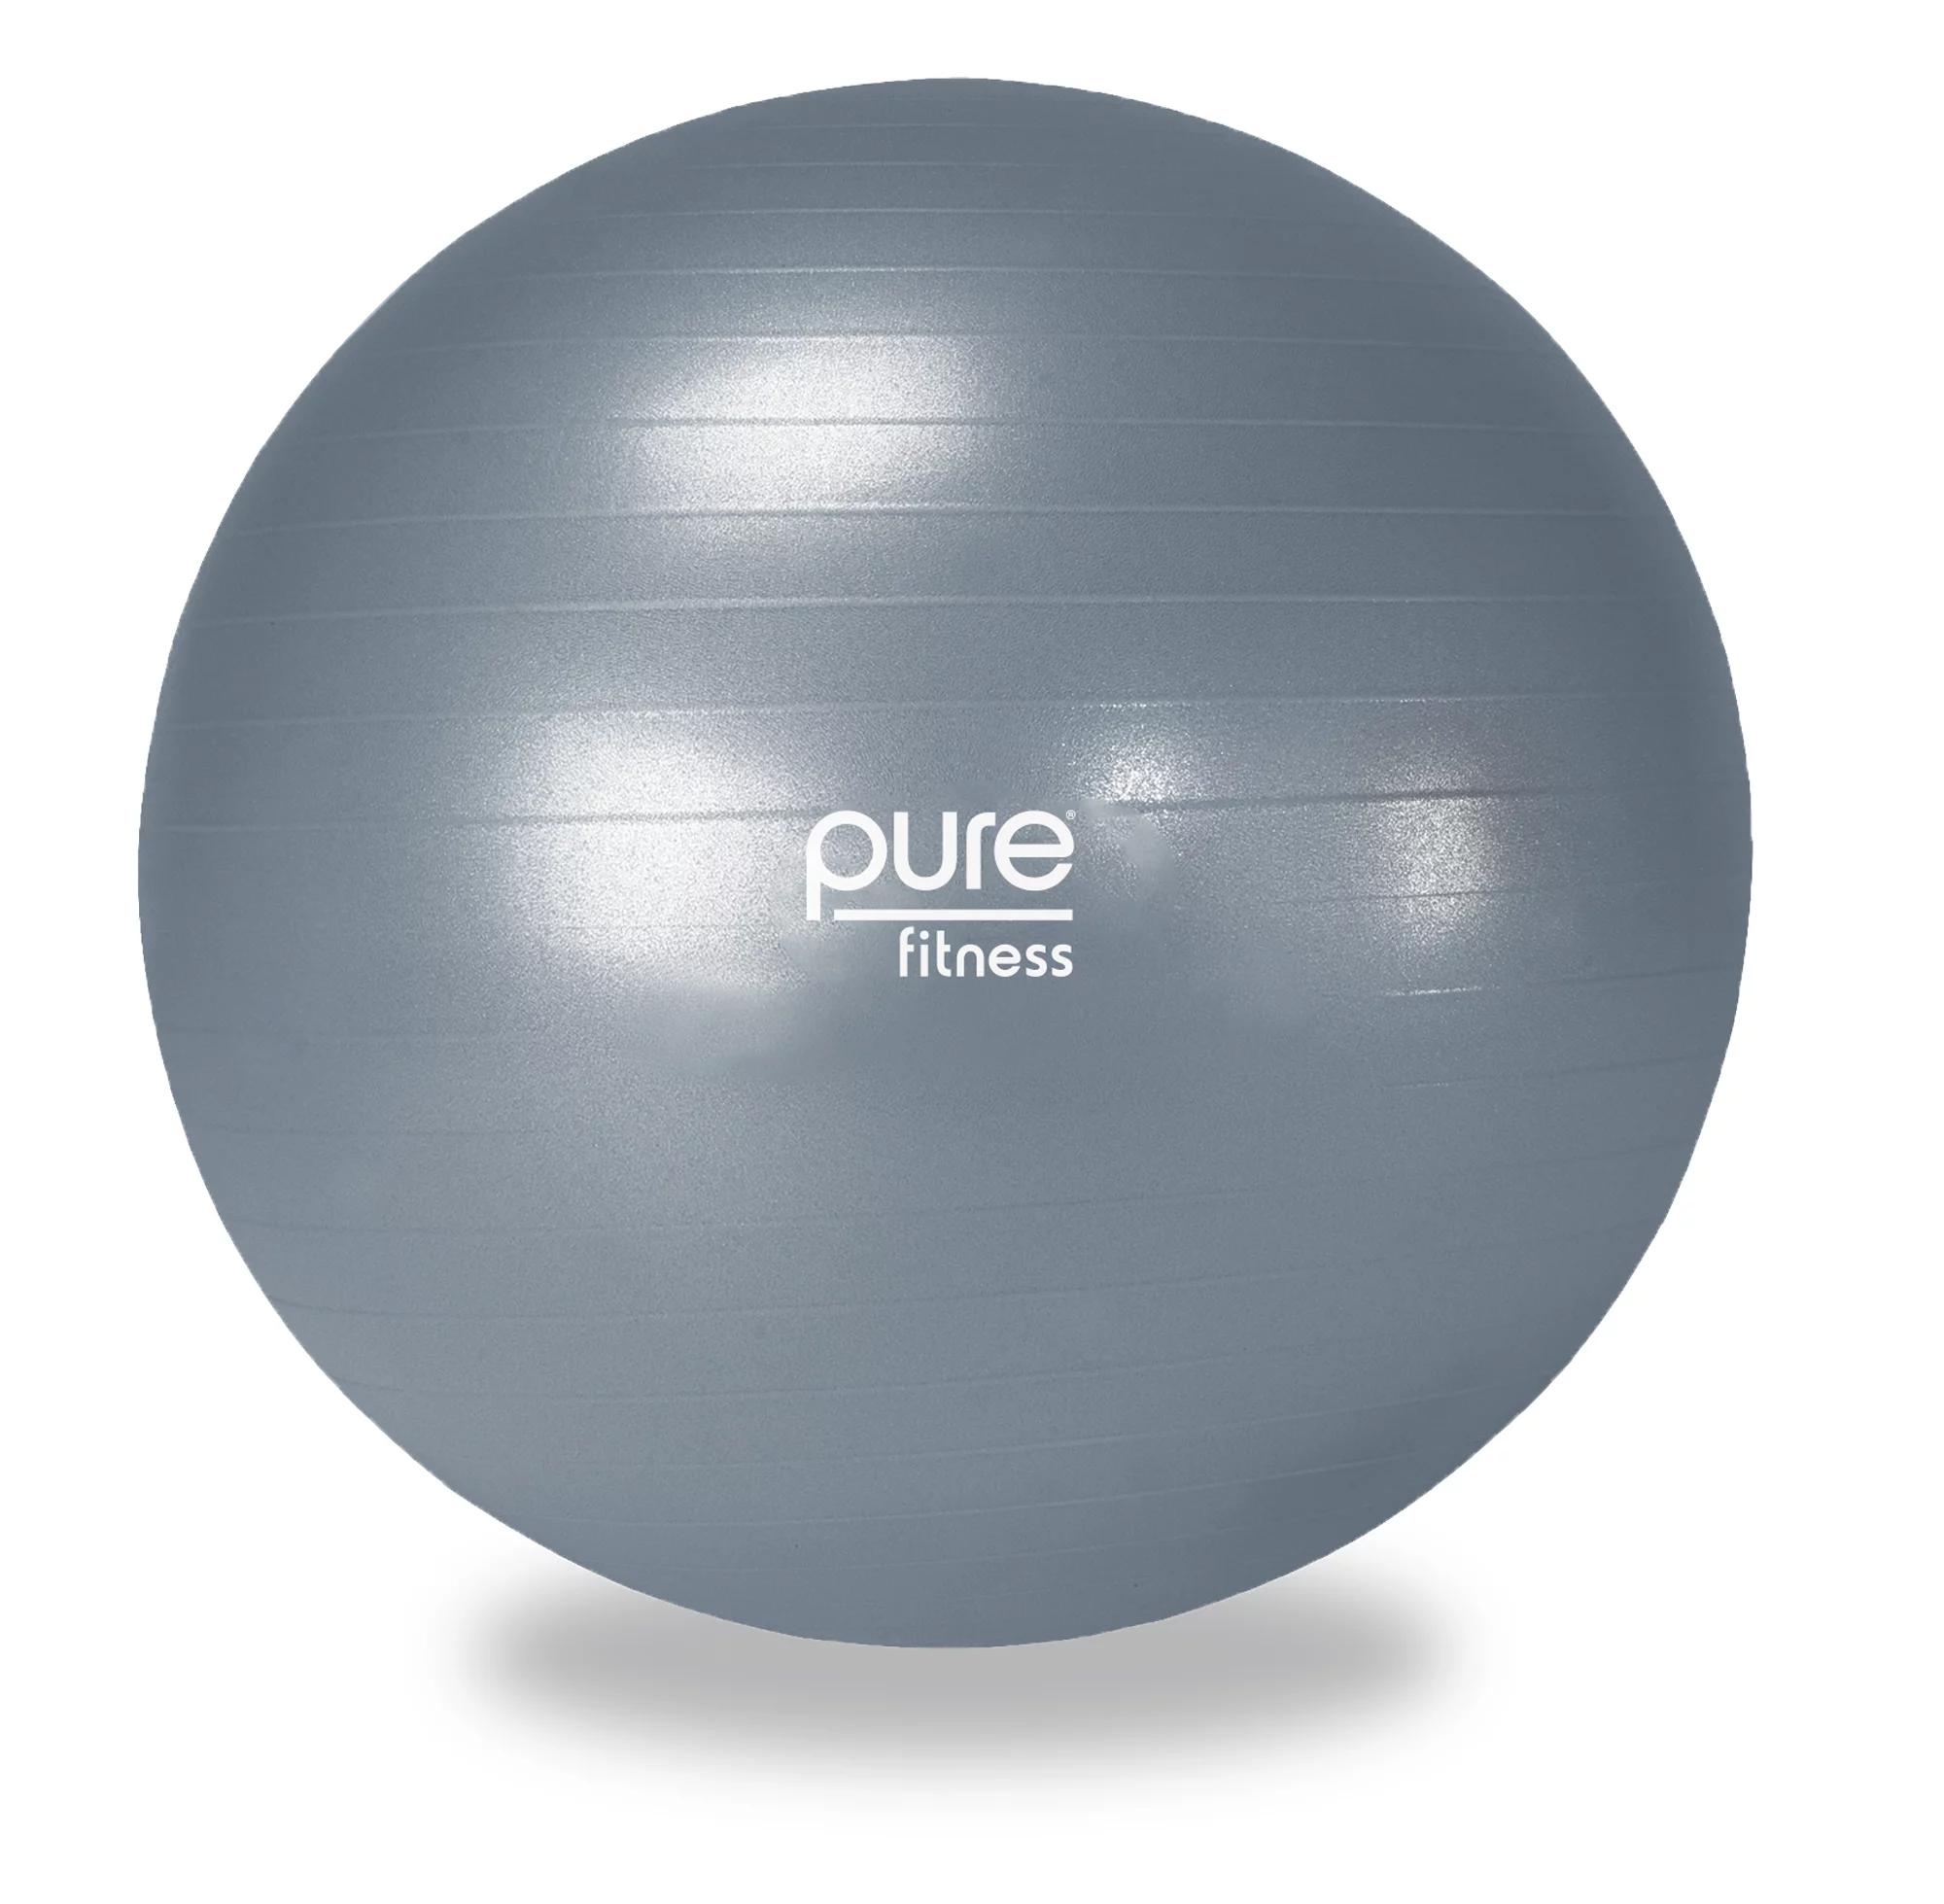 yoga ball size chart - How much weight can a 75cm yoga ball hold